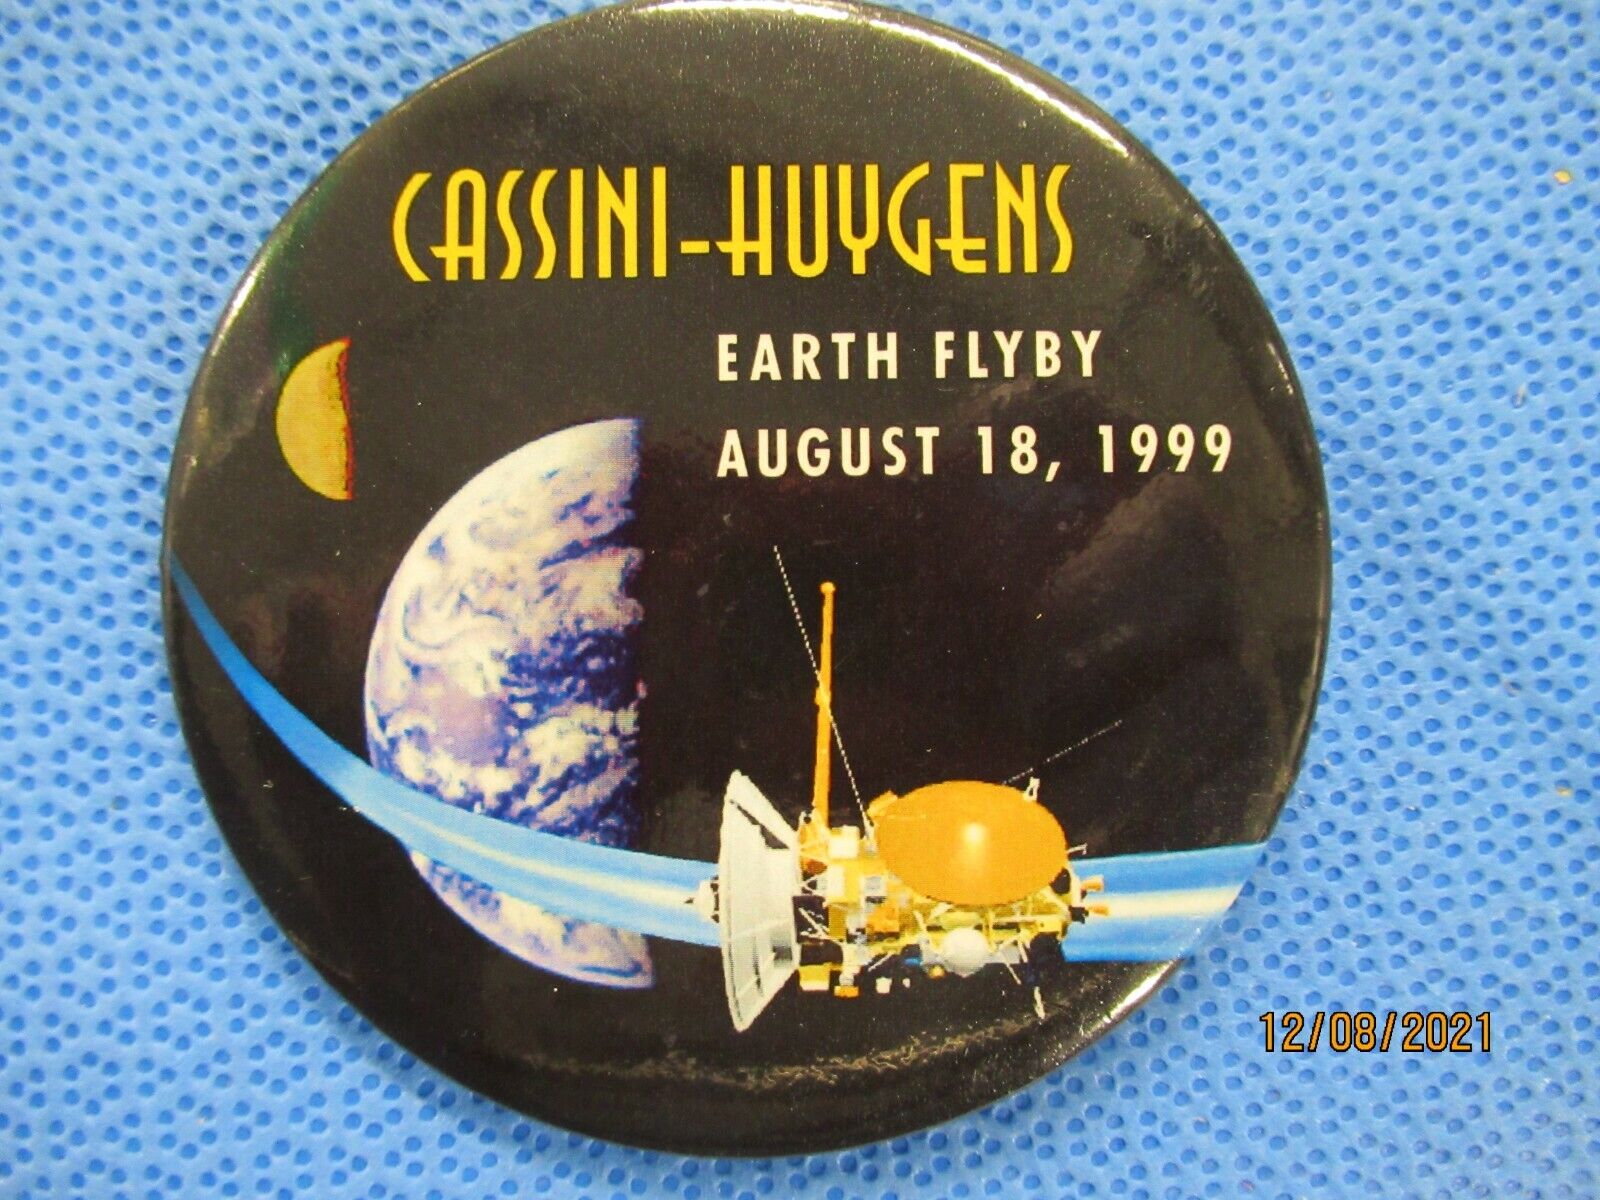 Official NASA Cassini-Huygens Earth Flyby Aug 18, 1999 Button